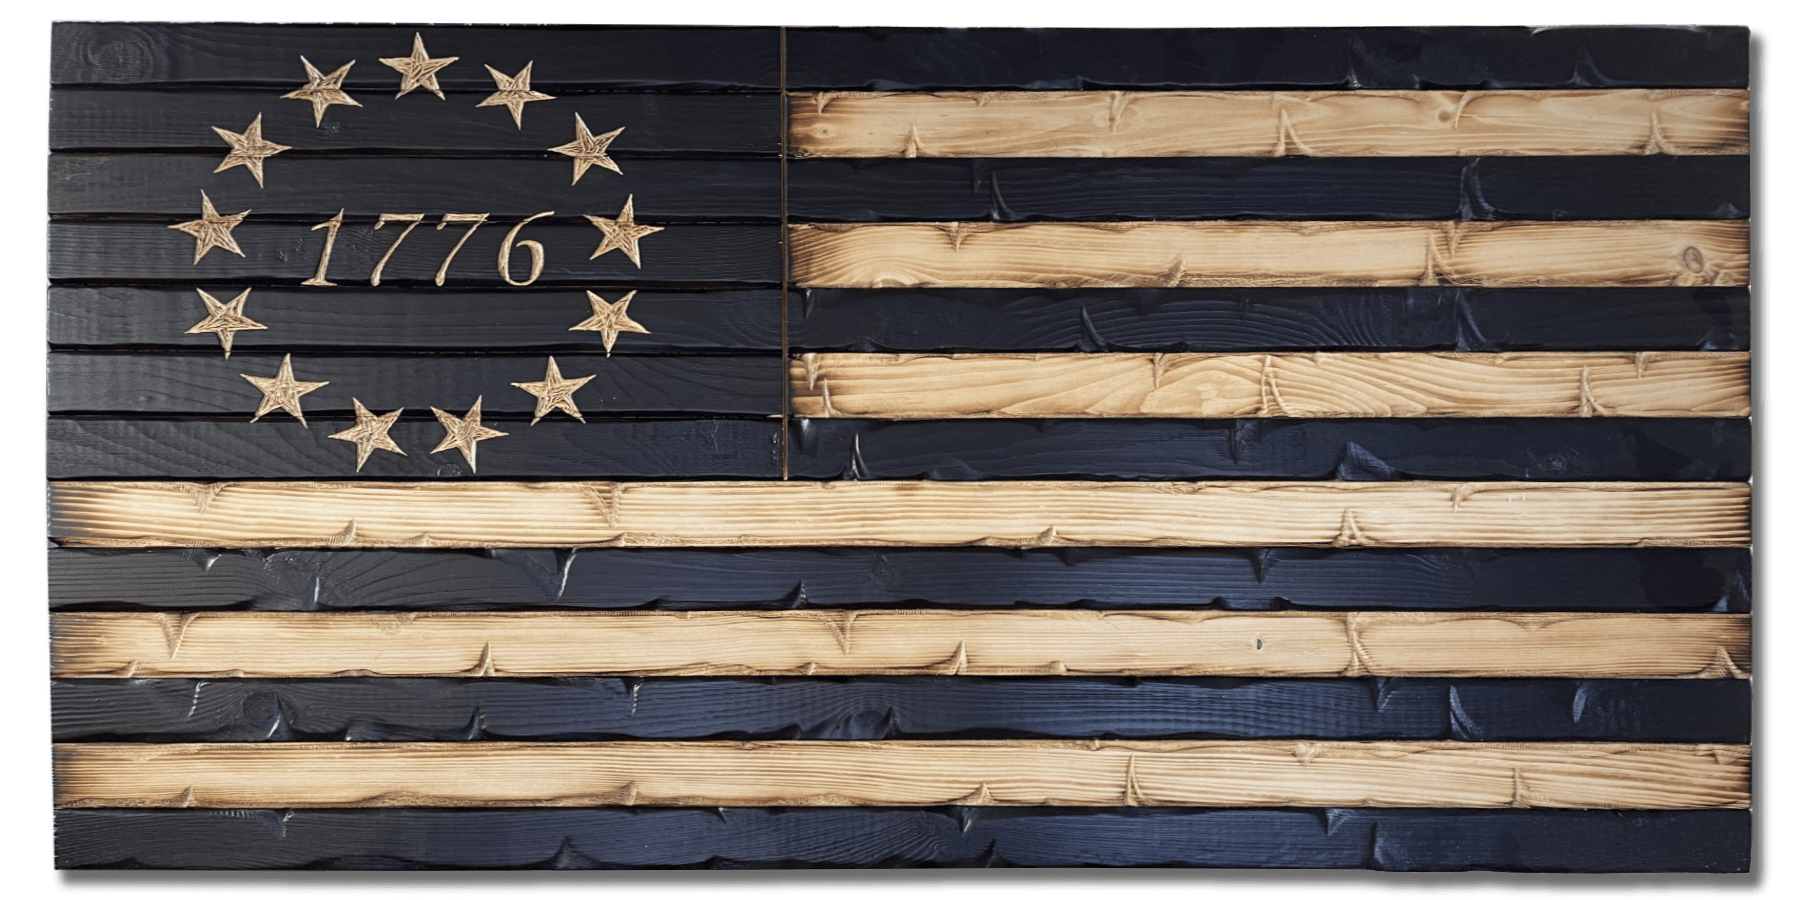 Rustic Charred Glory 1776 Handcarved Wooden American Flag